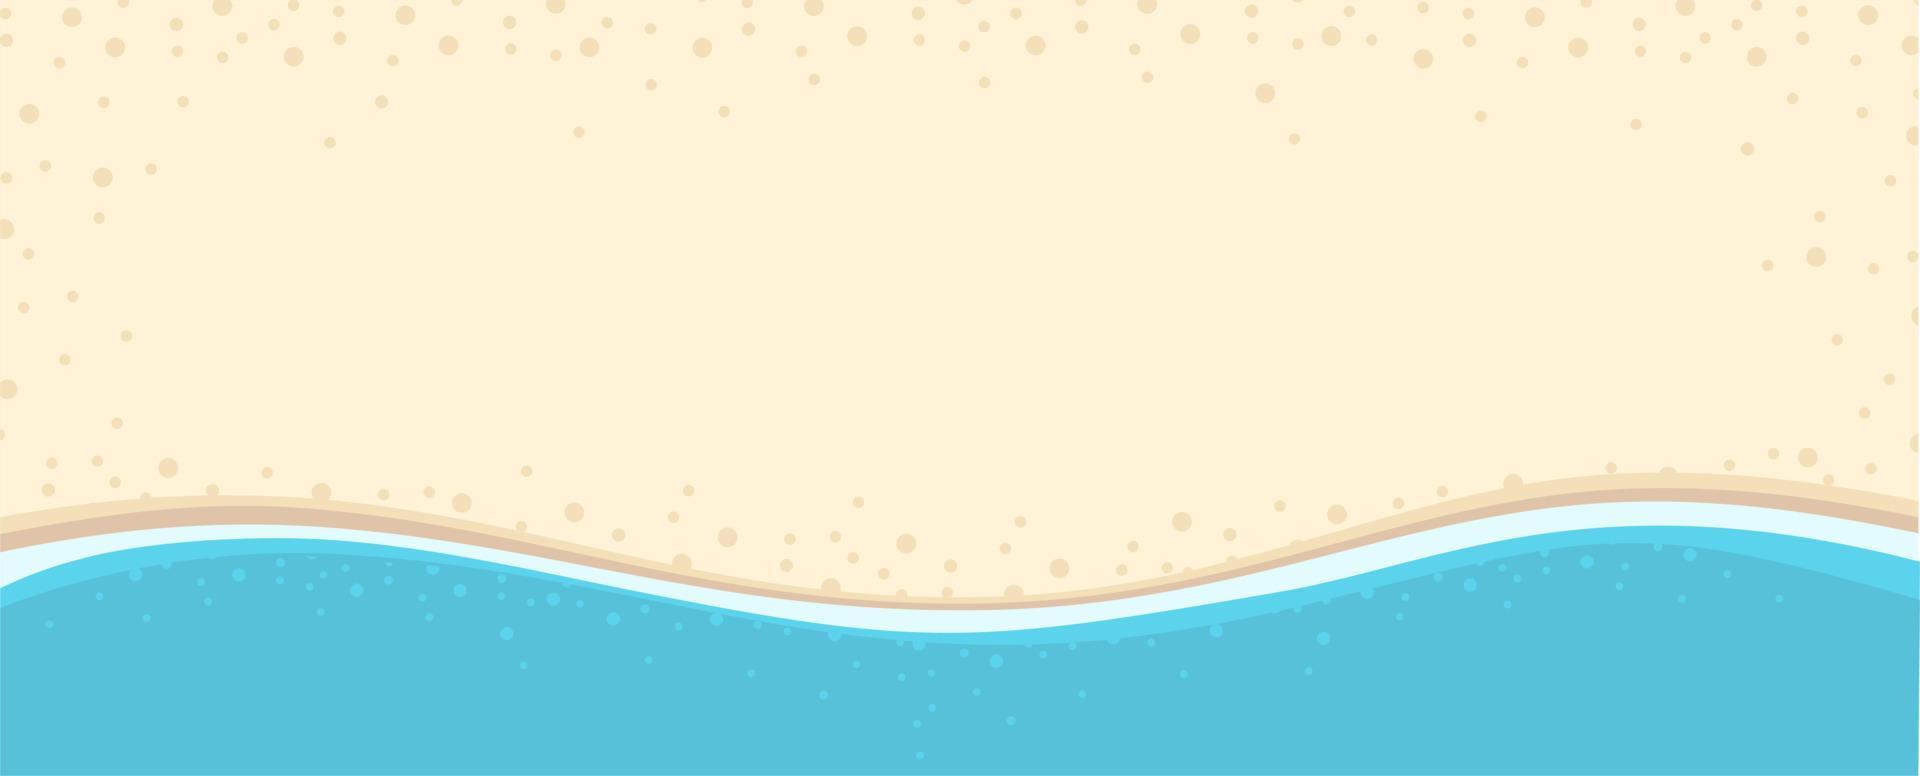 Beach background sand and water Vacation concept Vector illustration in flat style